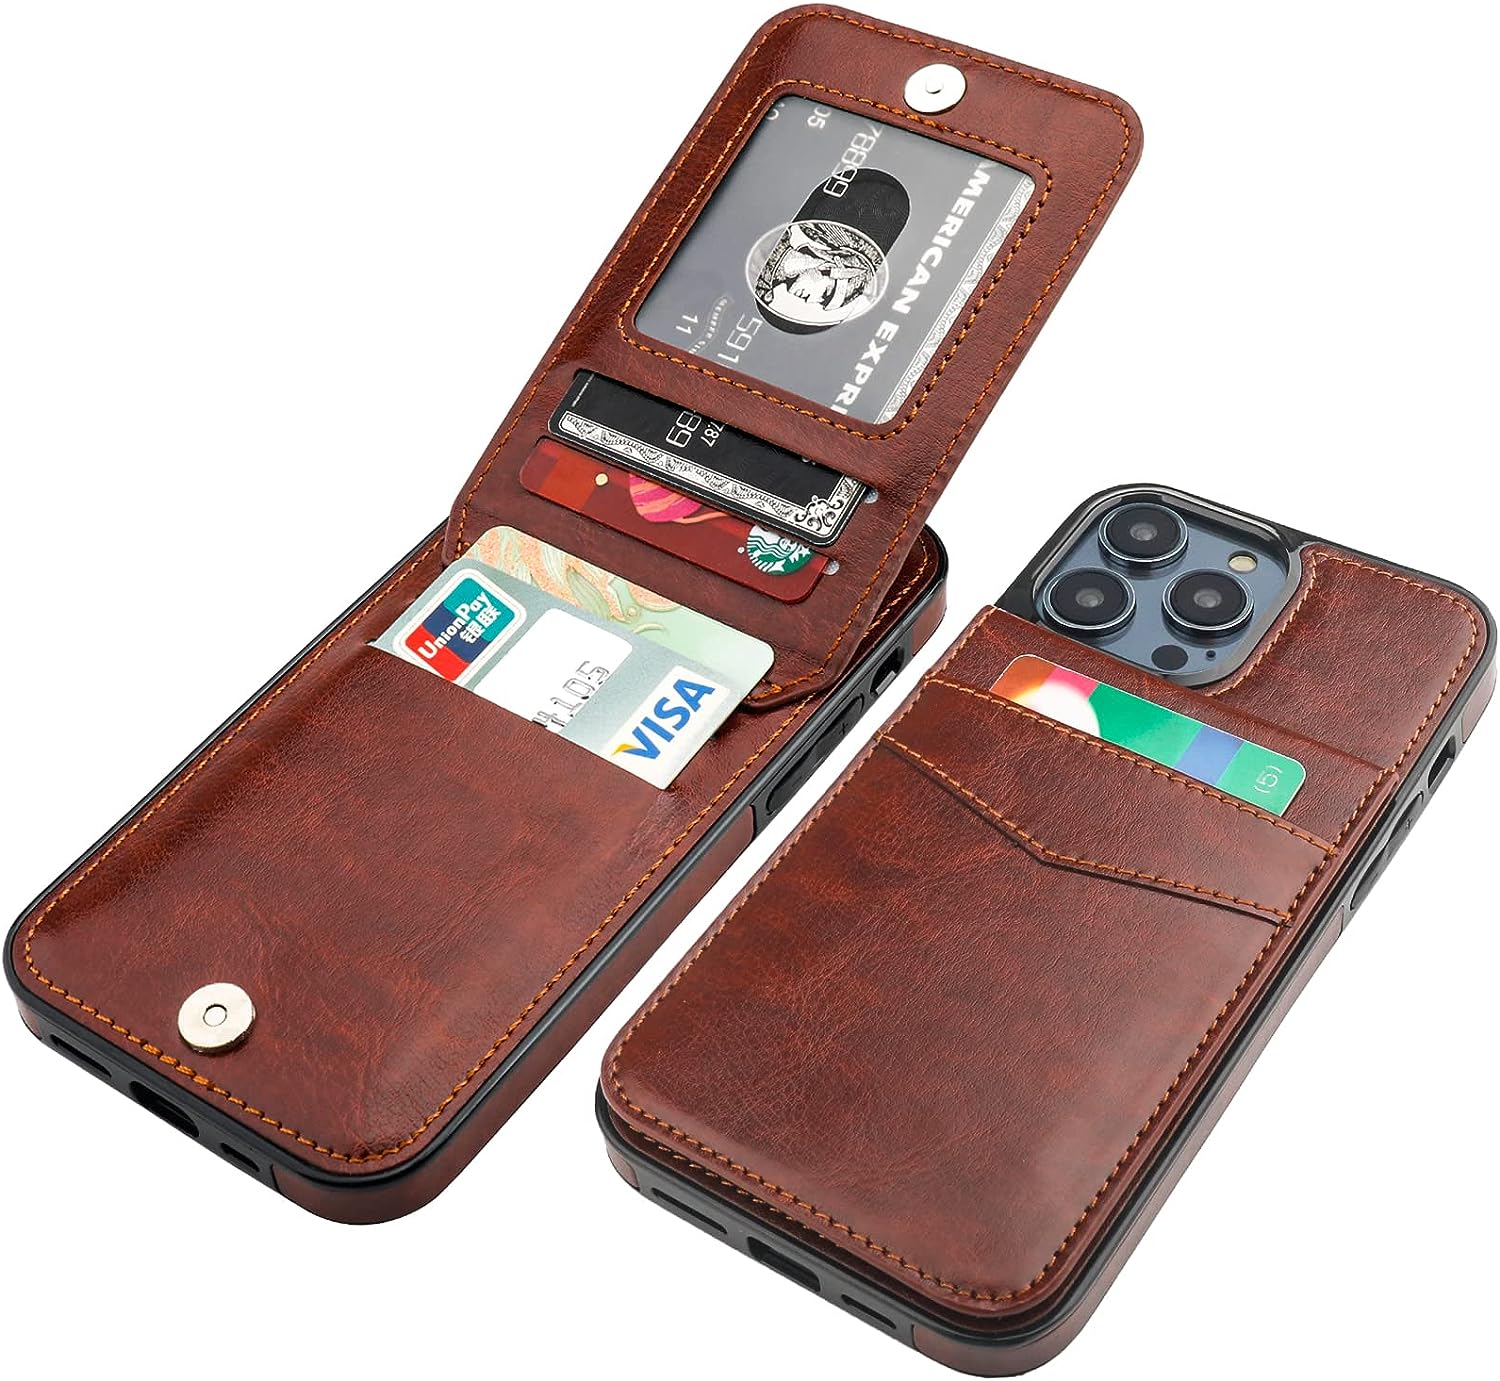 Top Quality iPhone 14 Pro Max Case Credit Card Holder for Sale in